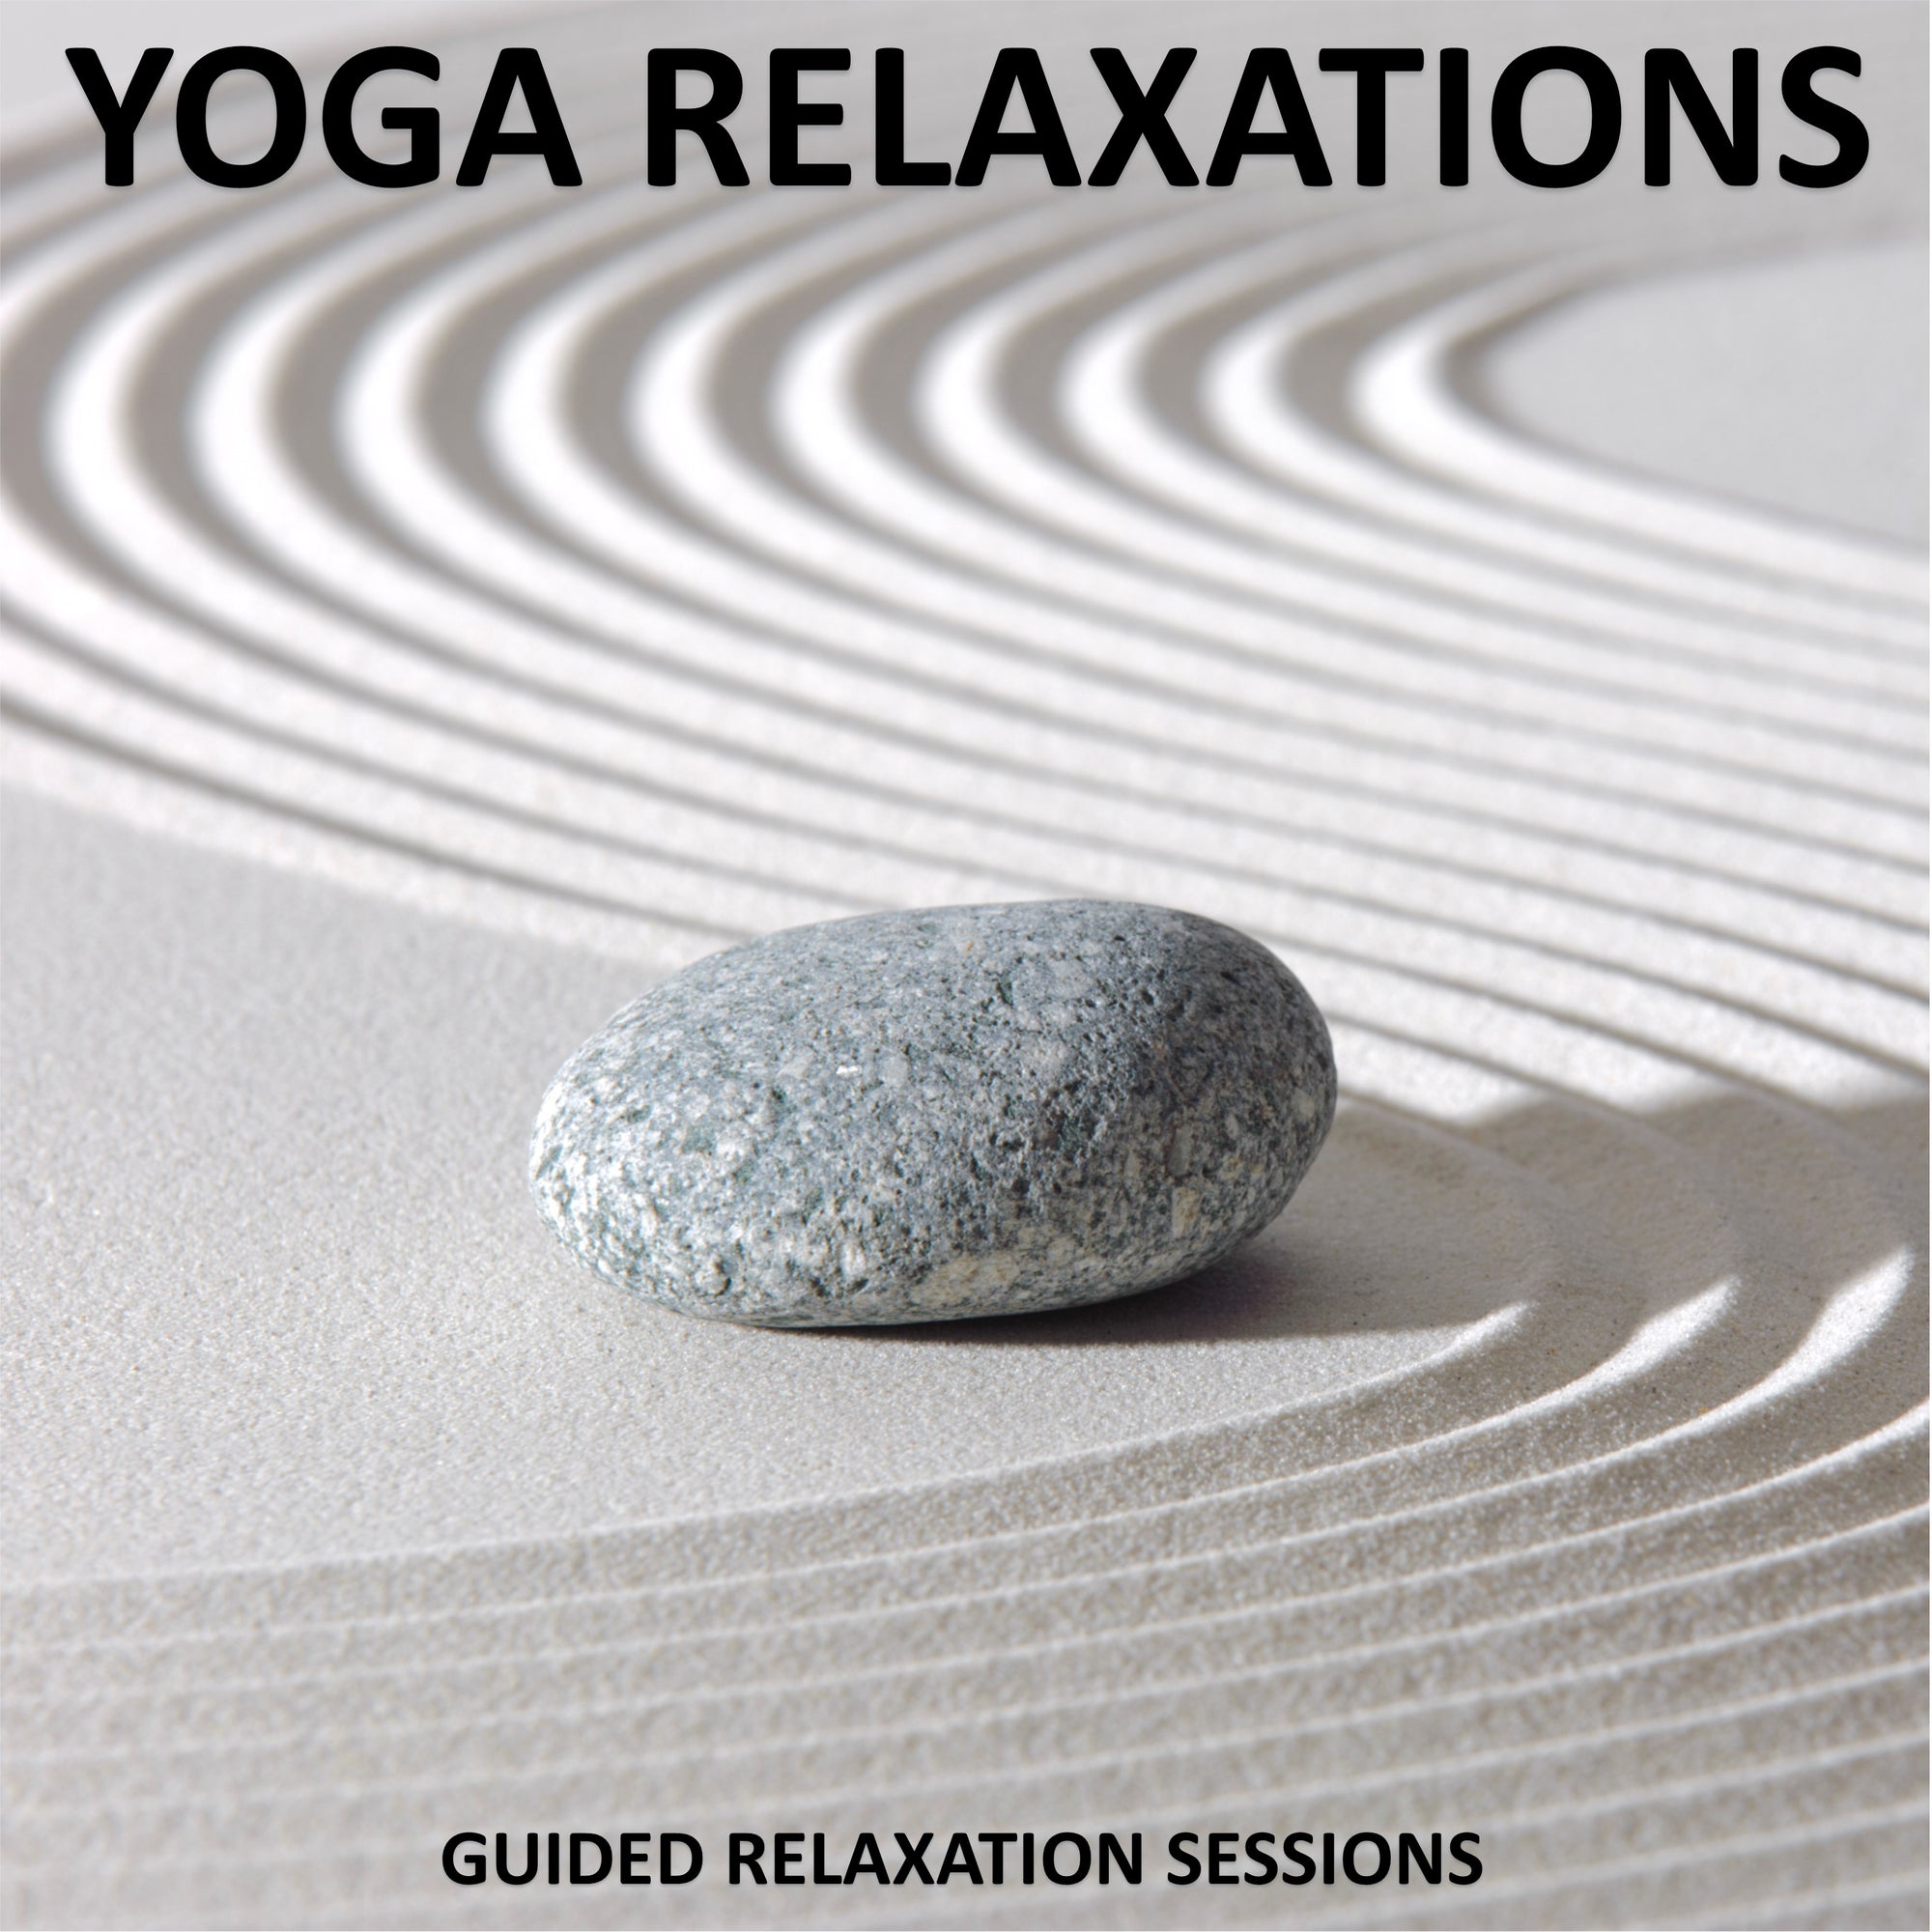 Yoga Relaxations